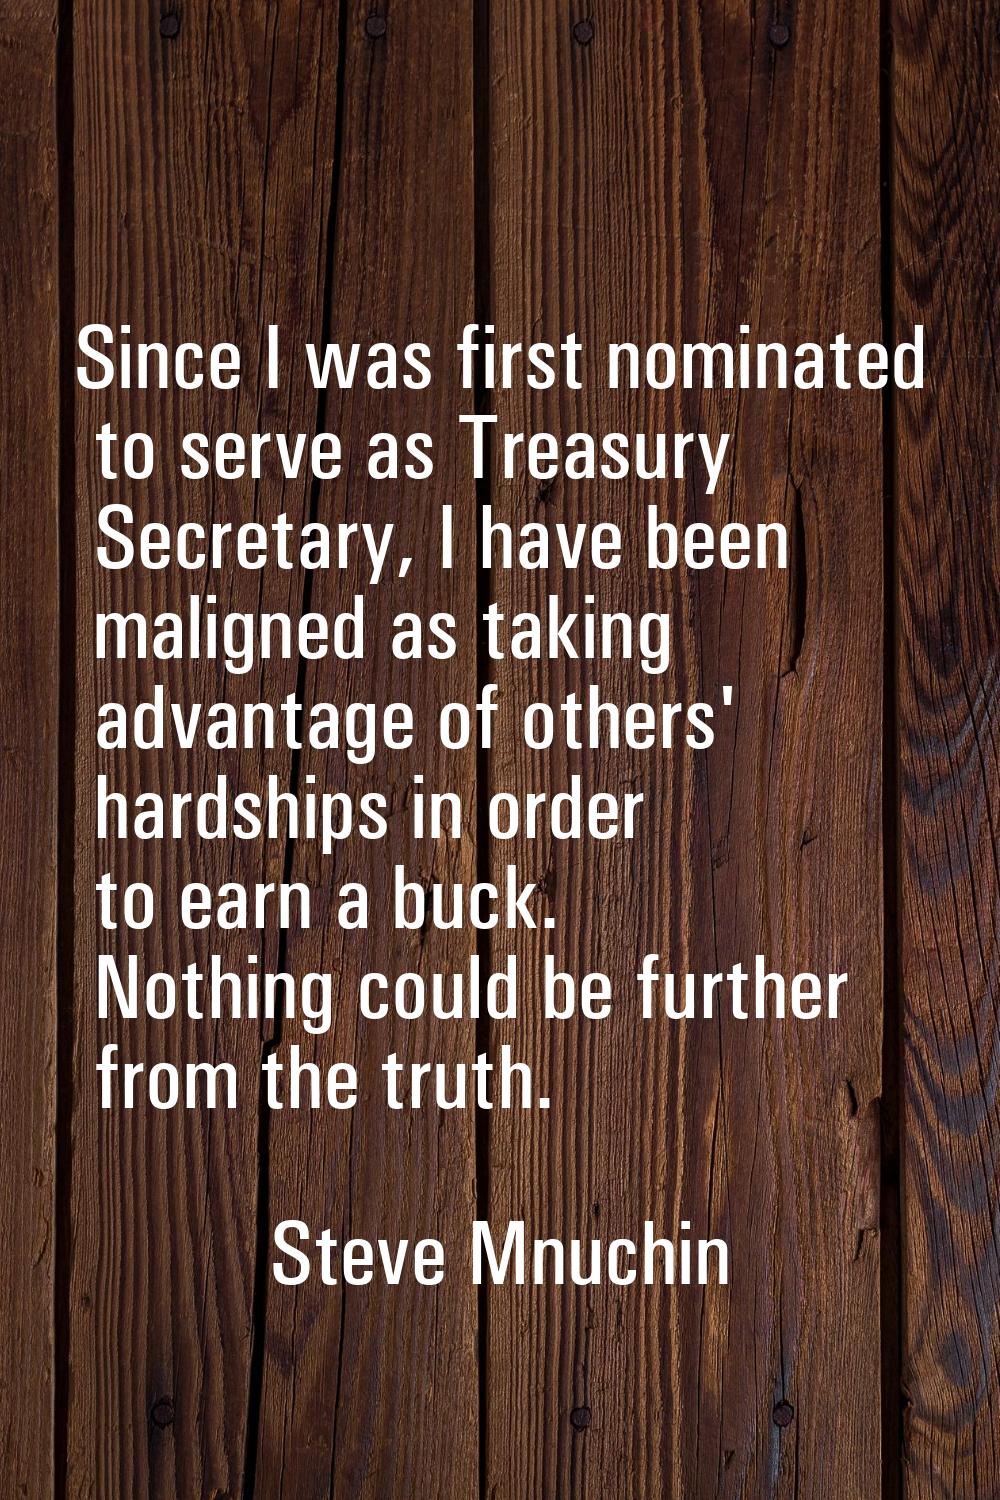 Since I was first nominated to serve as Treasury Secretary, I have been maligned as taking advantag